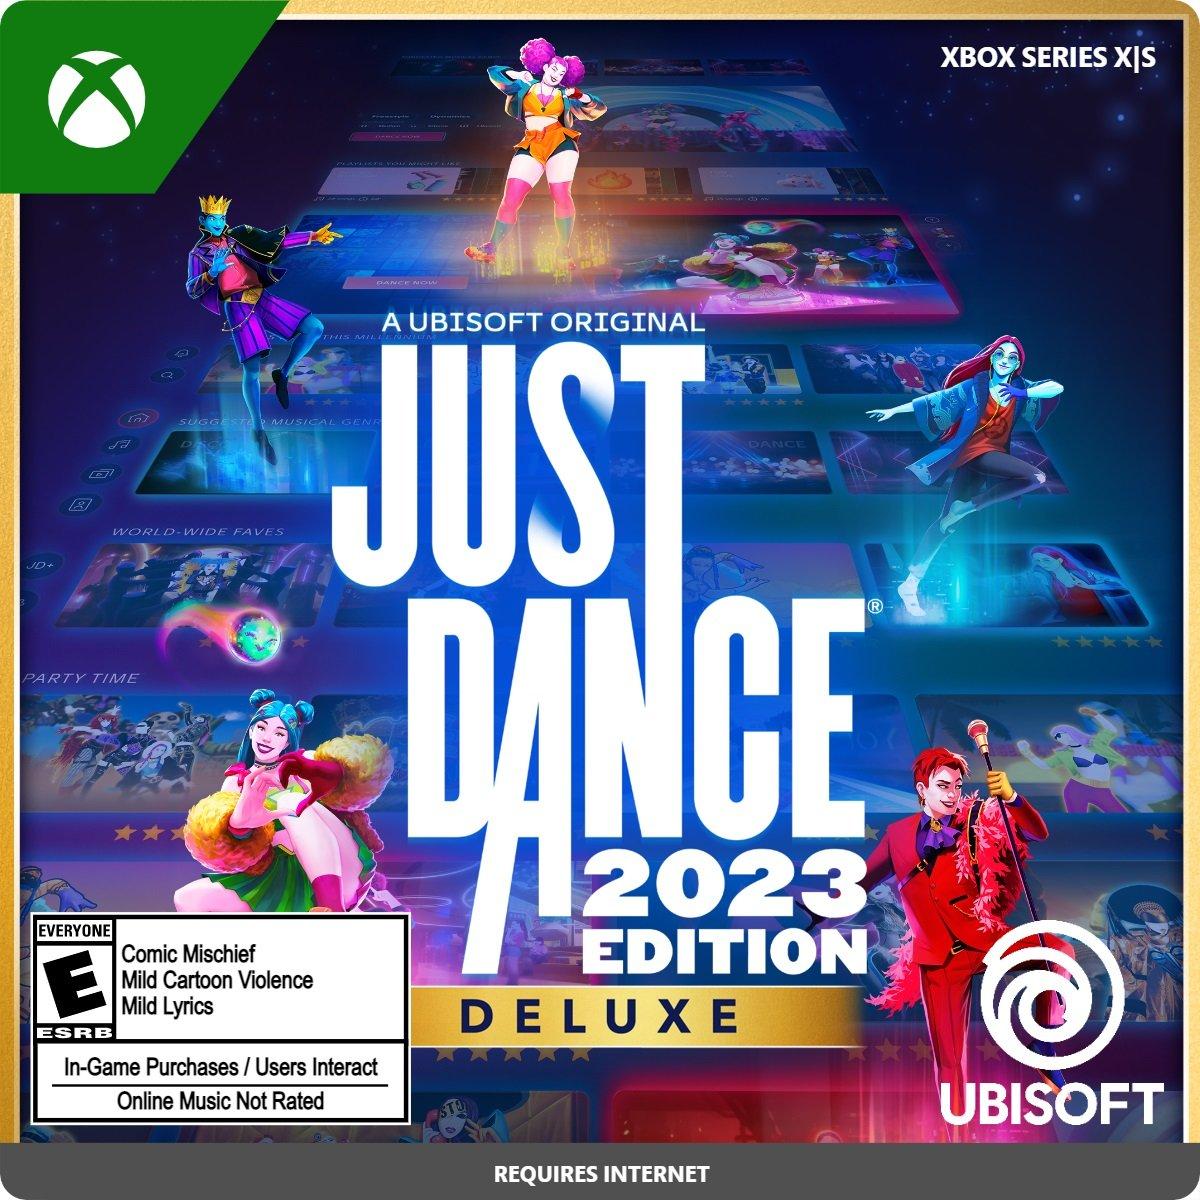 American Browser Xx Video - Just Dance 2023 Deluxe Edition - Xbox Series X